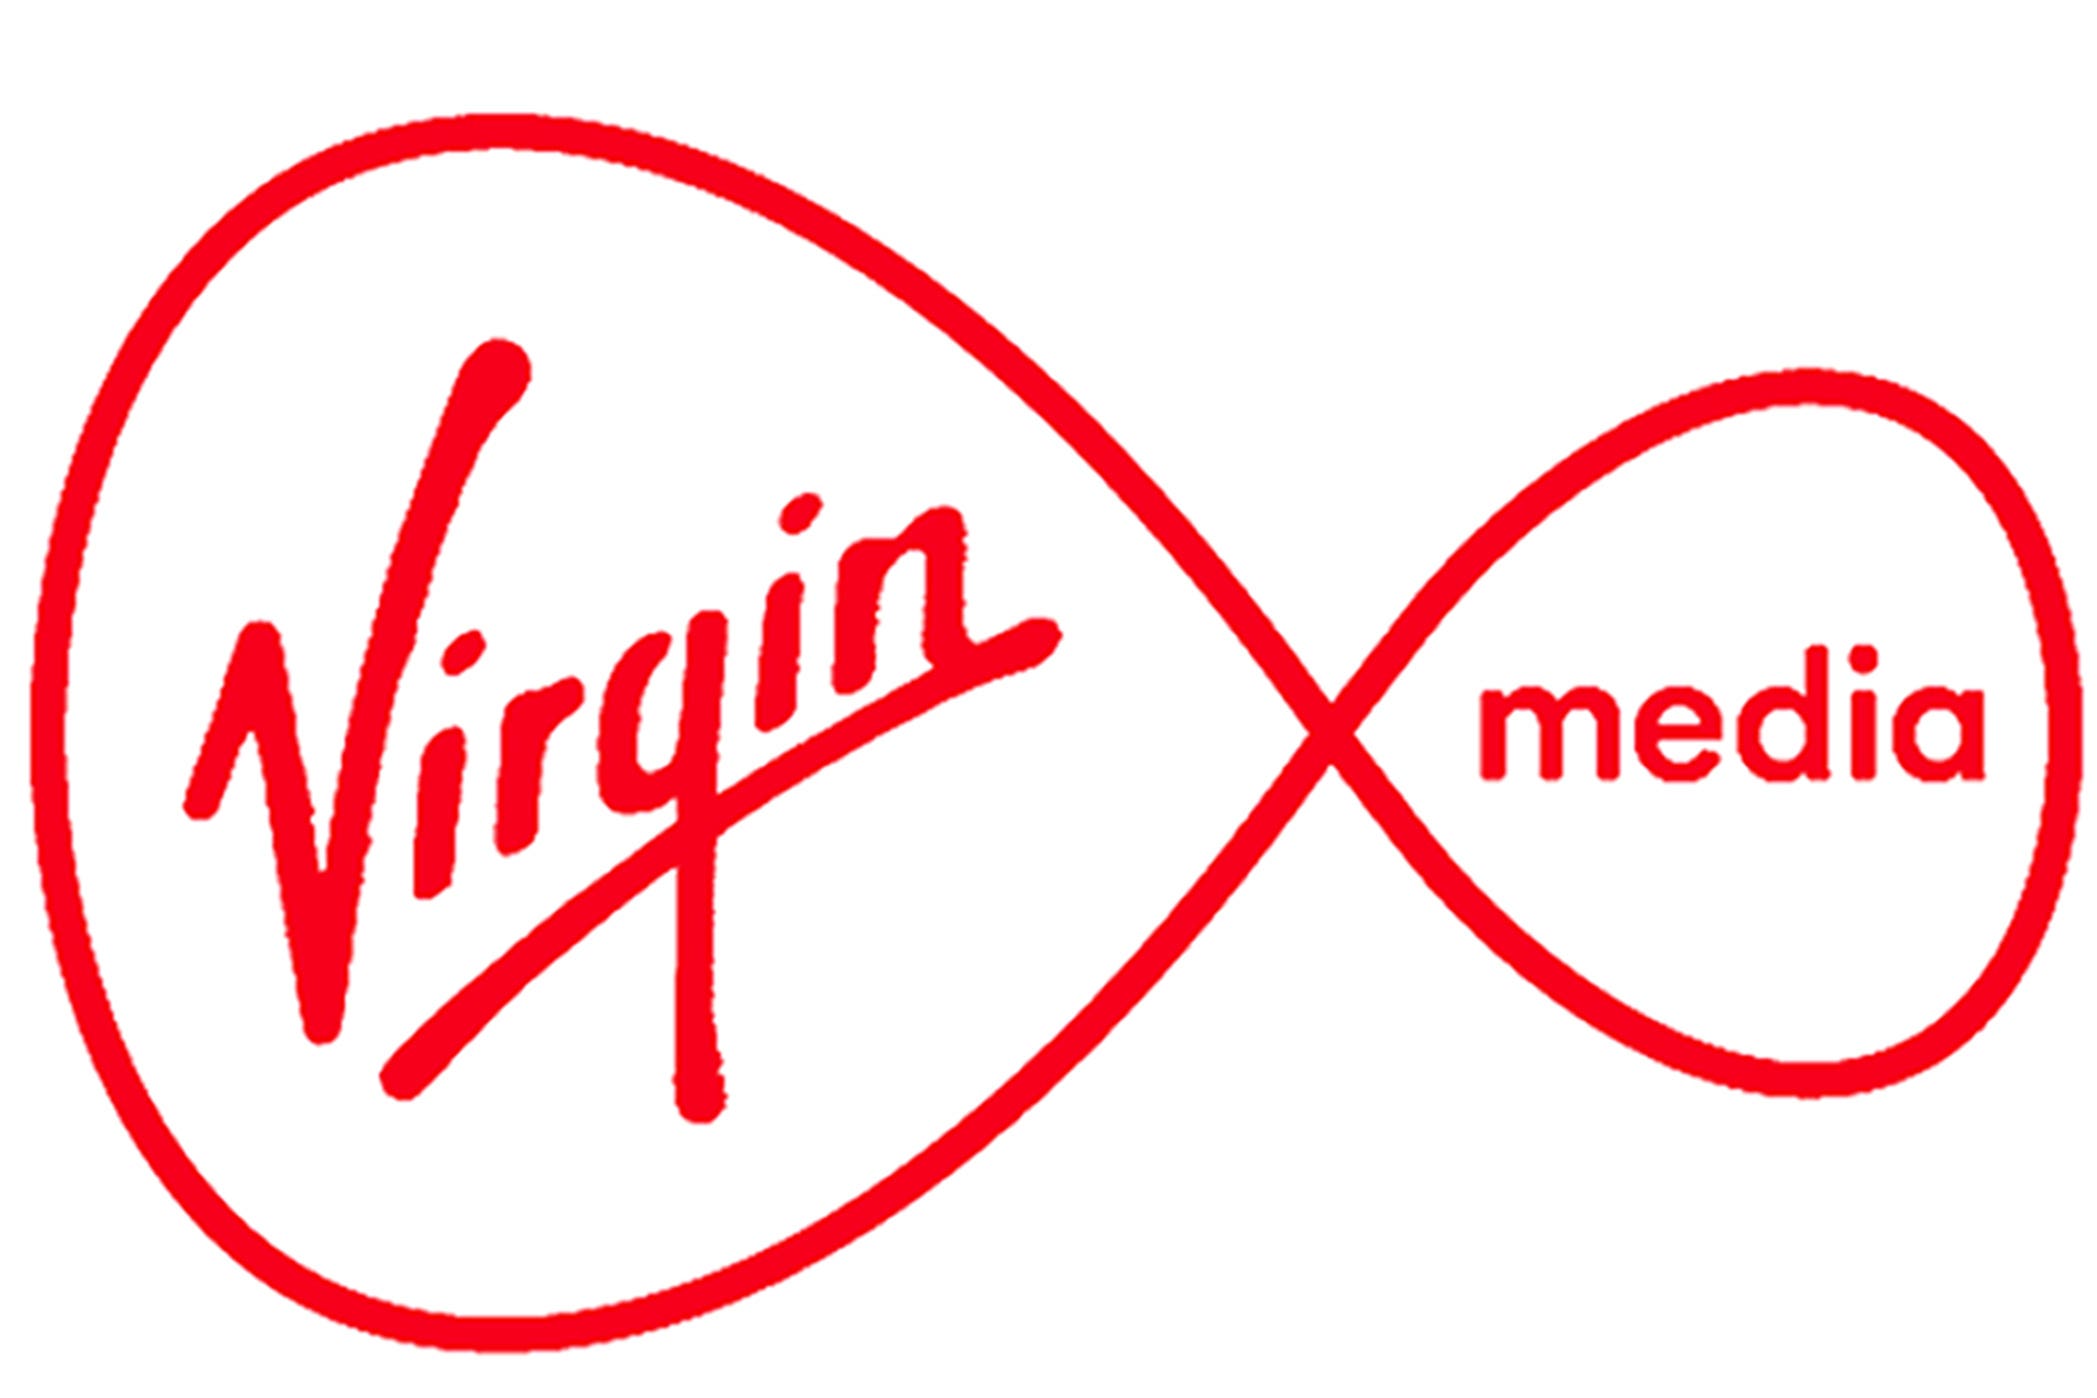 Virgin Media said it has restored broadband to customers after a widespread outage on Tuesday morning (Virgin Media/PA)